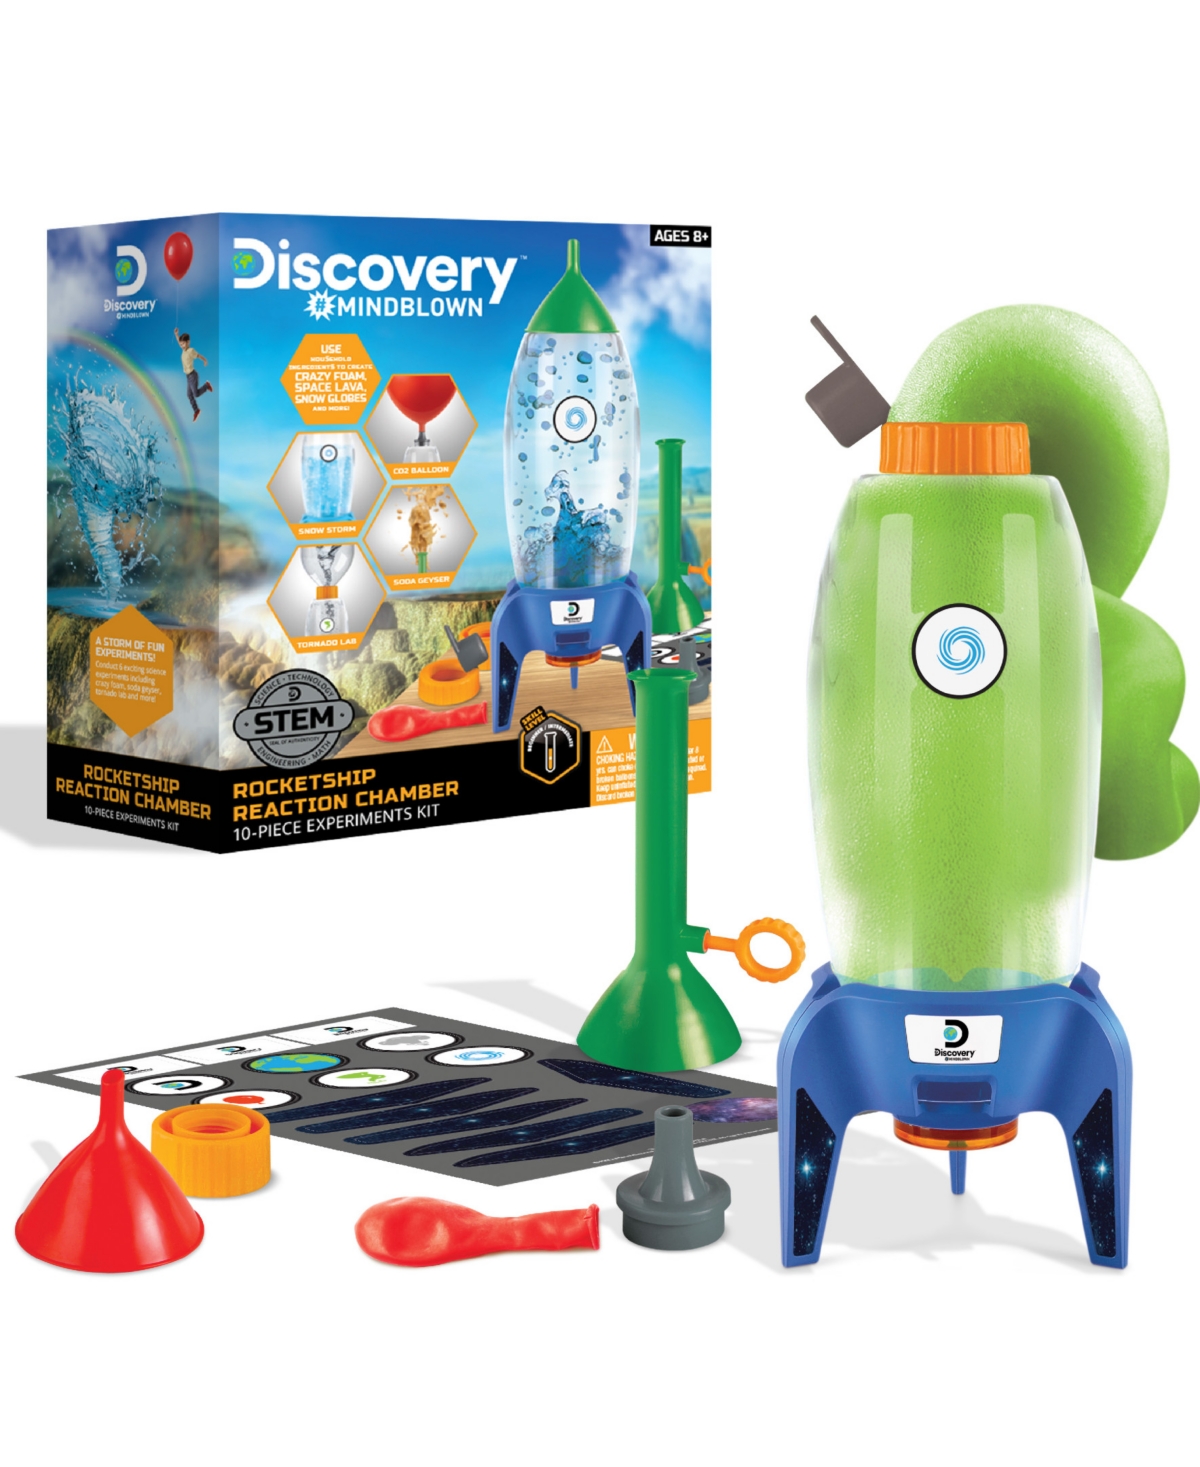 Discovery Mindblown Kids' Closeout! Discovery #mindblown Stem Rocket Ship Reaction Chamber Set In Open Miscellaneous